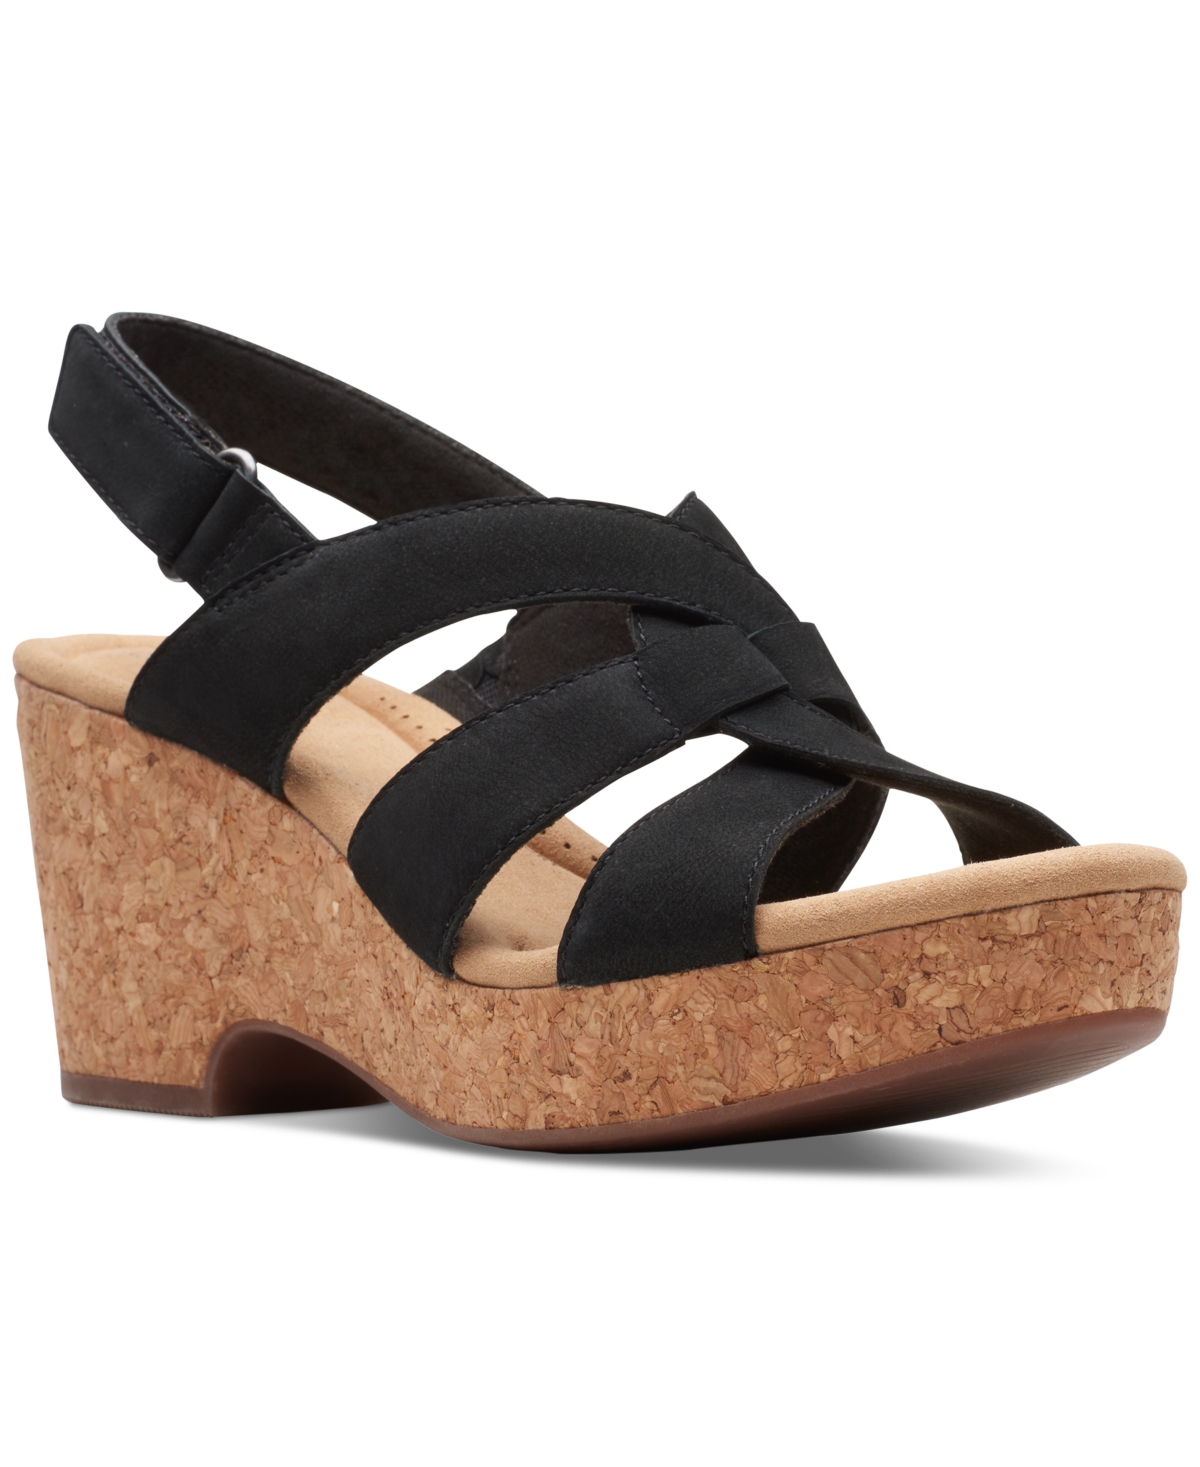 Shop Clarks Women's Collection Giselle Beach Slingback Wedge Sandals In Black Nubuck